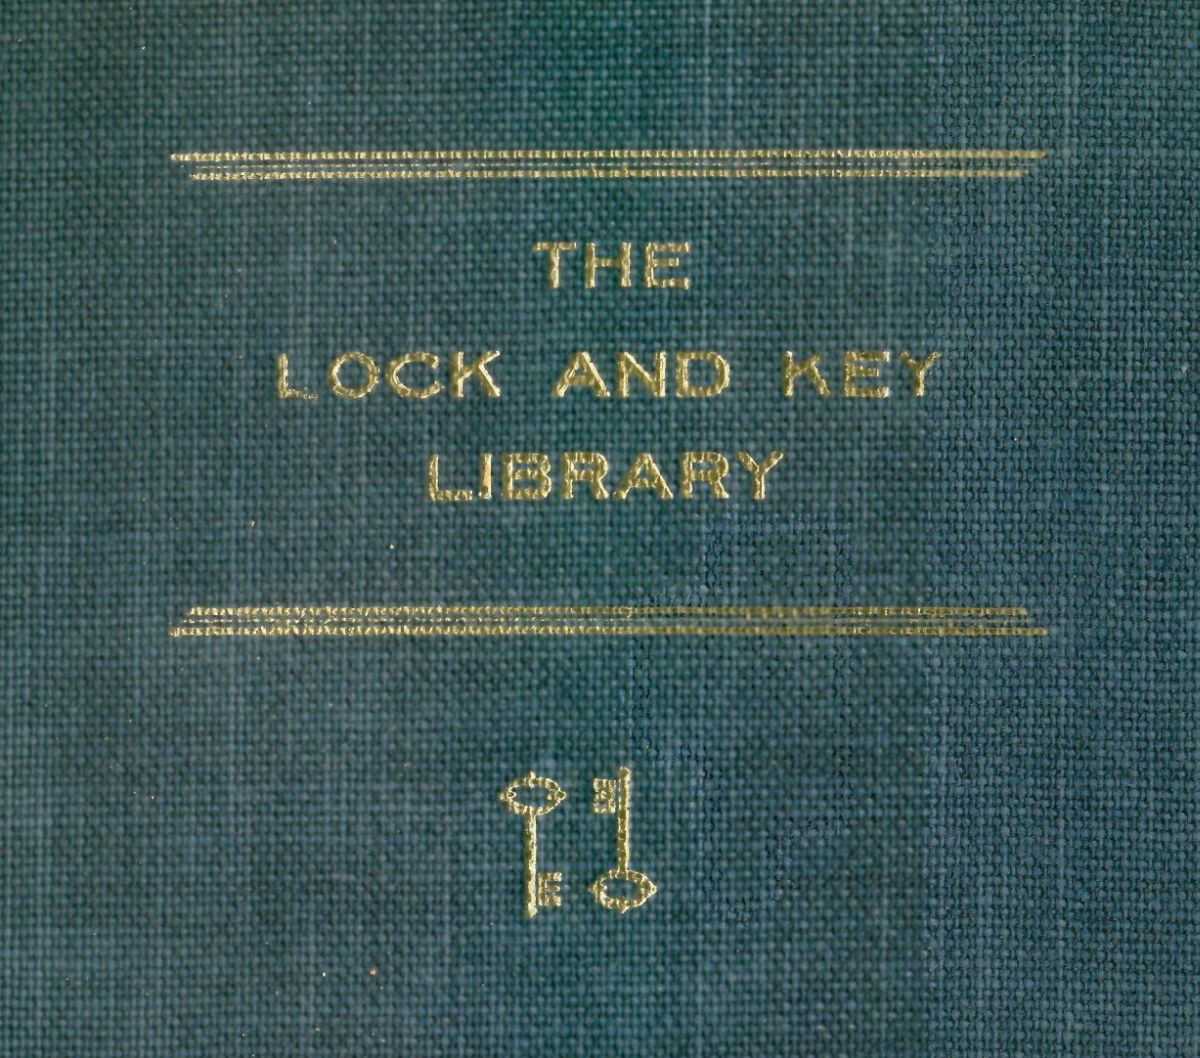 A Gazetteer of Lock and Key Makers